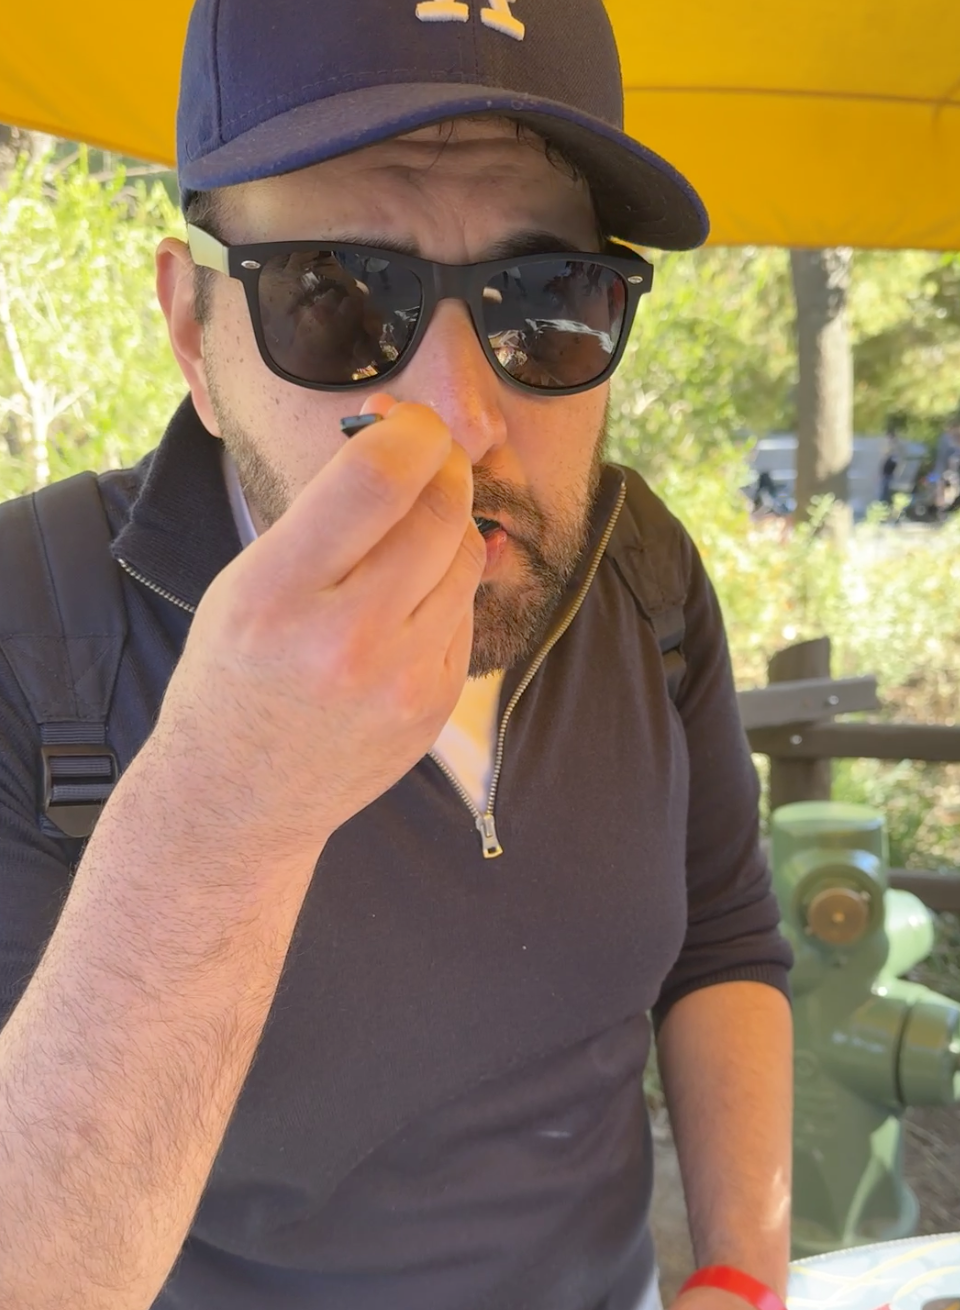 A man wearing sunglasses and a cap is eating under a yellow umbrella outdoors